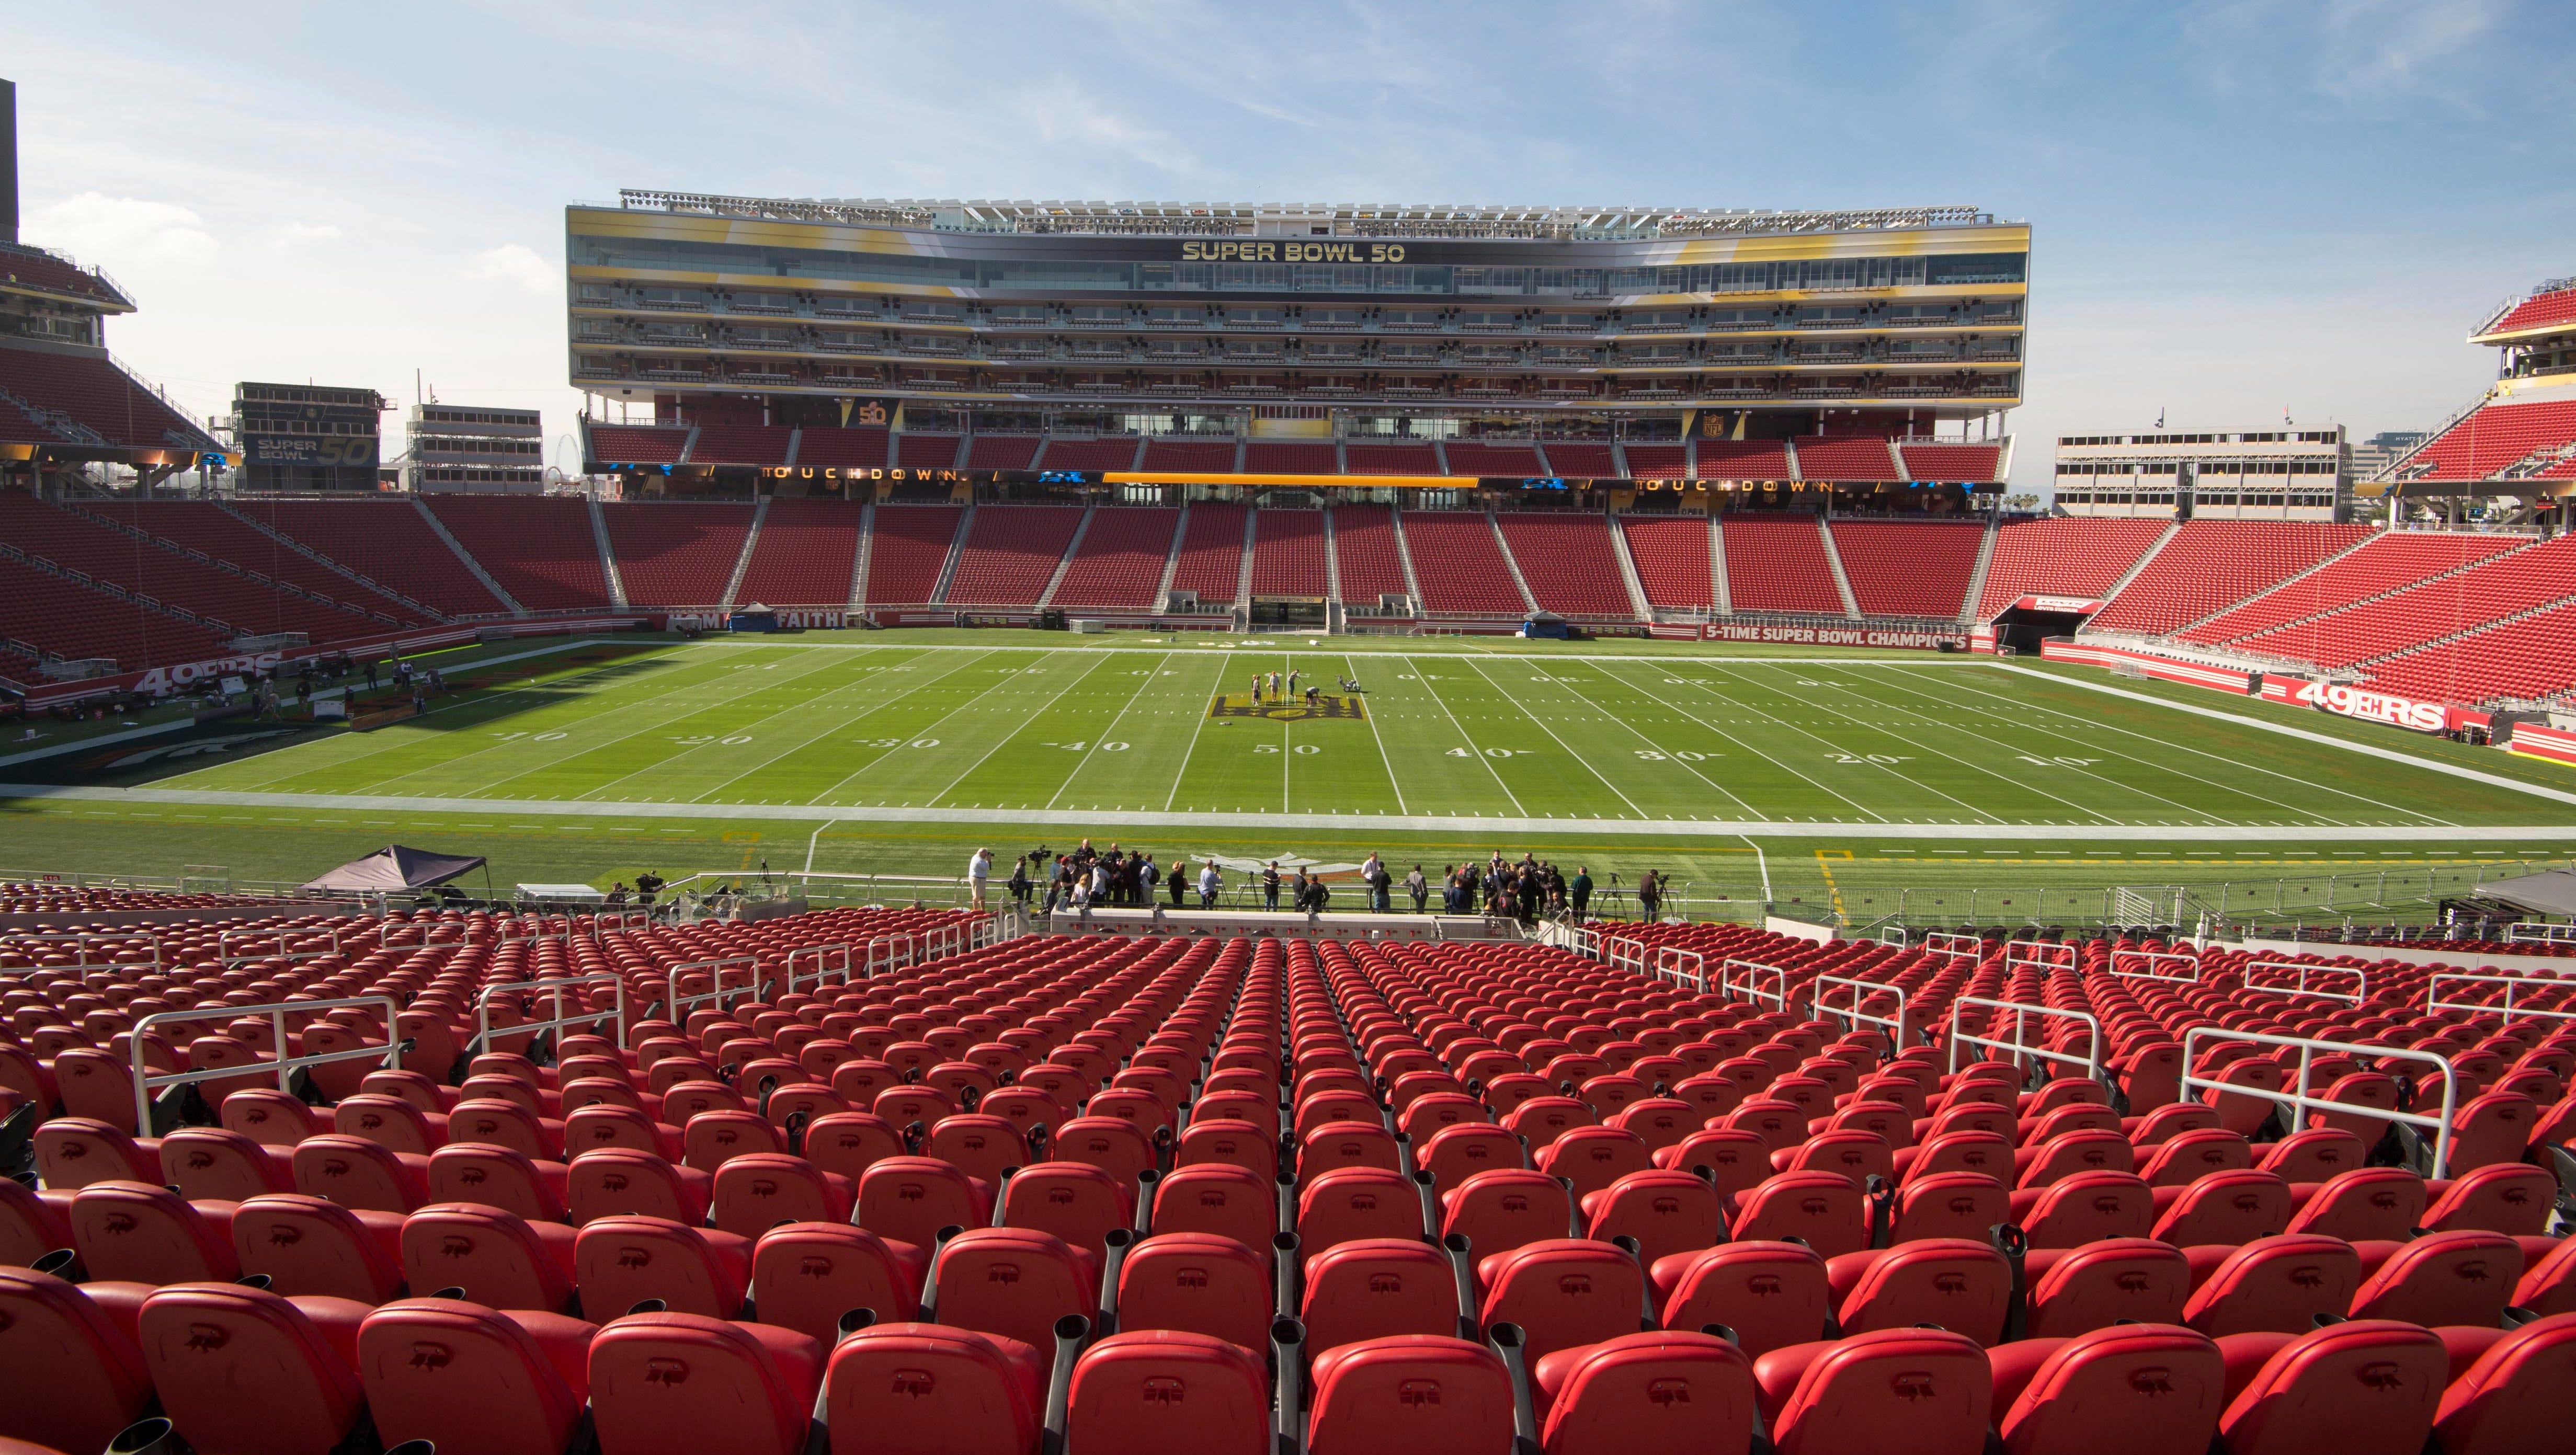 Oakland Raiders have a new home waiting for them in Levi's Stadium